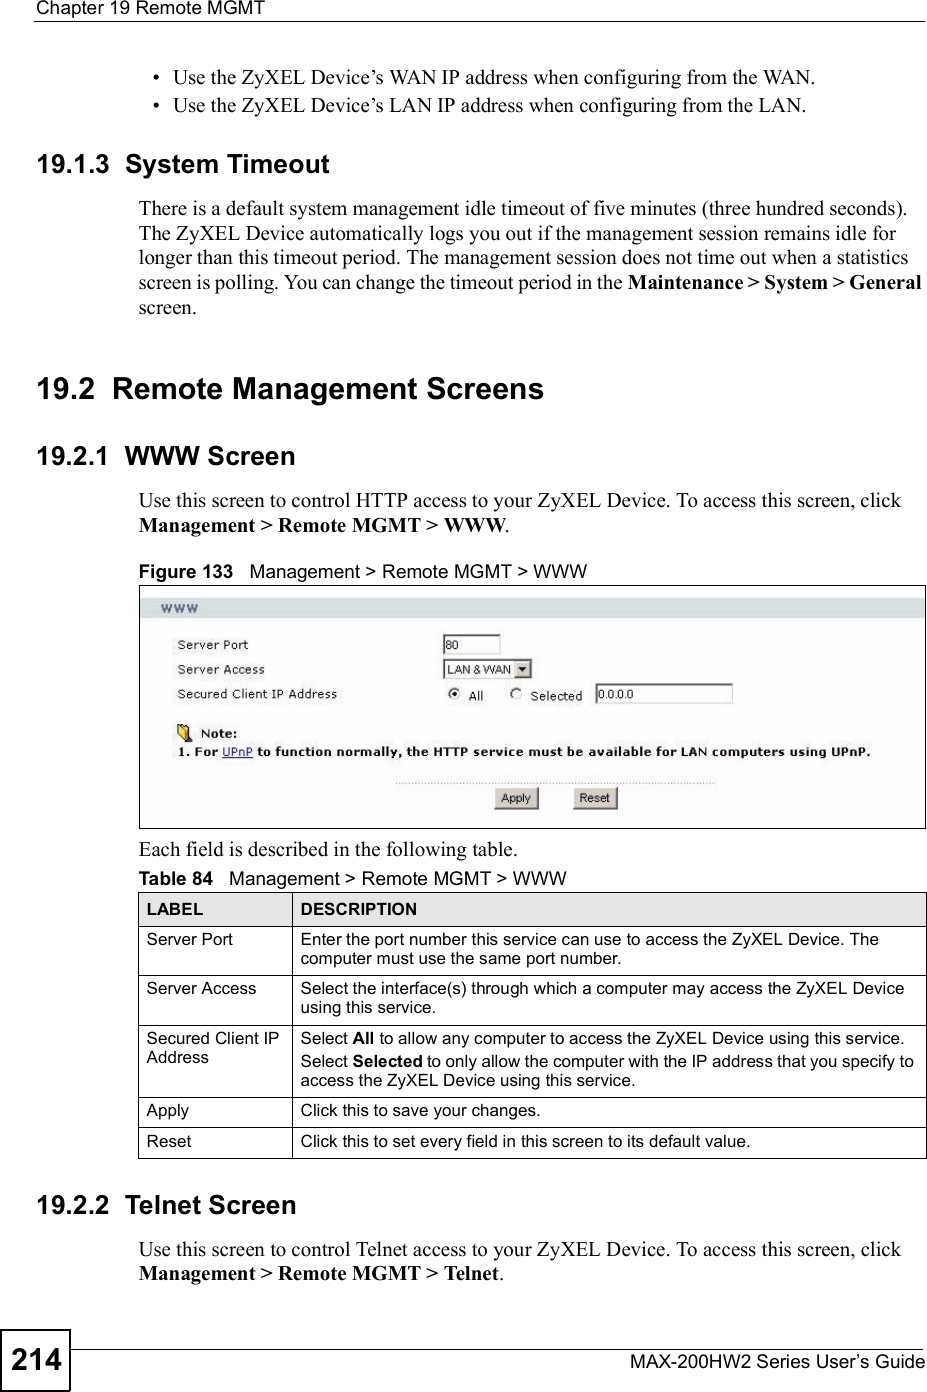 Chapter 19Remote MGMTMAX-200HW2 Series User s Guide214 Use the ZyXEL Device!s WAN IP address when configuring from the WAN.  Use the ZyXEL Device!s LAN IP address when configuring from the LAN.19.1.3  System TimeoutThere is a default system management idle timeout of five minutes (three hundred seconds). The ZyXEL Device automatically logs you out if the management session remains idle for longer than this timeout period. The management session does not time out when a statistics screen is polling. You can change the timeout period in the Maintenance &gt; System &gt; Generalscreen.19.2  Remote Management Screens19.2.1  WWW ScreenUse this screen to control HTTP access to your ZyXEL Device. To access this screen, click Management &gt; Remote MGMT &gt; WWW.Figure 133   Management &gt; Remote MGMT &gt; WWWEach field is described in the following table.19.2.2  Telnet ScreenUse this screen to control Telnet access to your ZyXEL Device. To access this screen, click Management &gt; Remote MGMT &gt; Telnet.Table 84   Management &gt; Remote MGMT &gt; WWWLABEL DESCRIPTIONServer Port Enter the port number this service can use to access the ZyXEL Device. The computer must use the same port number.Server Access Select the interface(s) through which a computer may access the ZyXEL Device using this service.Secured Client IP AddressSelect All to allow any computer to access the ZyXEL Device using this service.Select Selected to only allow the computer with the IP address that you specify to access the ZyXEL Device using this service.Apply Click this to save your changes.Reset Click this to set every field in this screen to its default value.